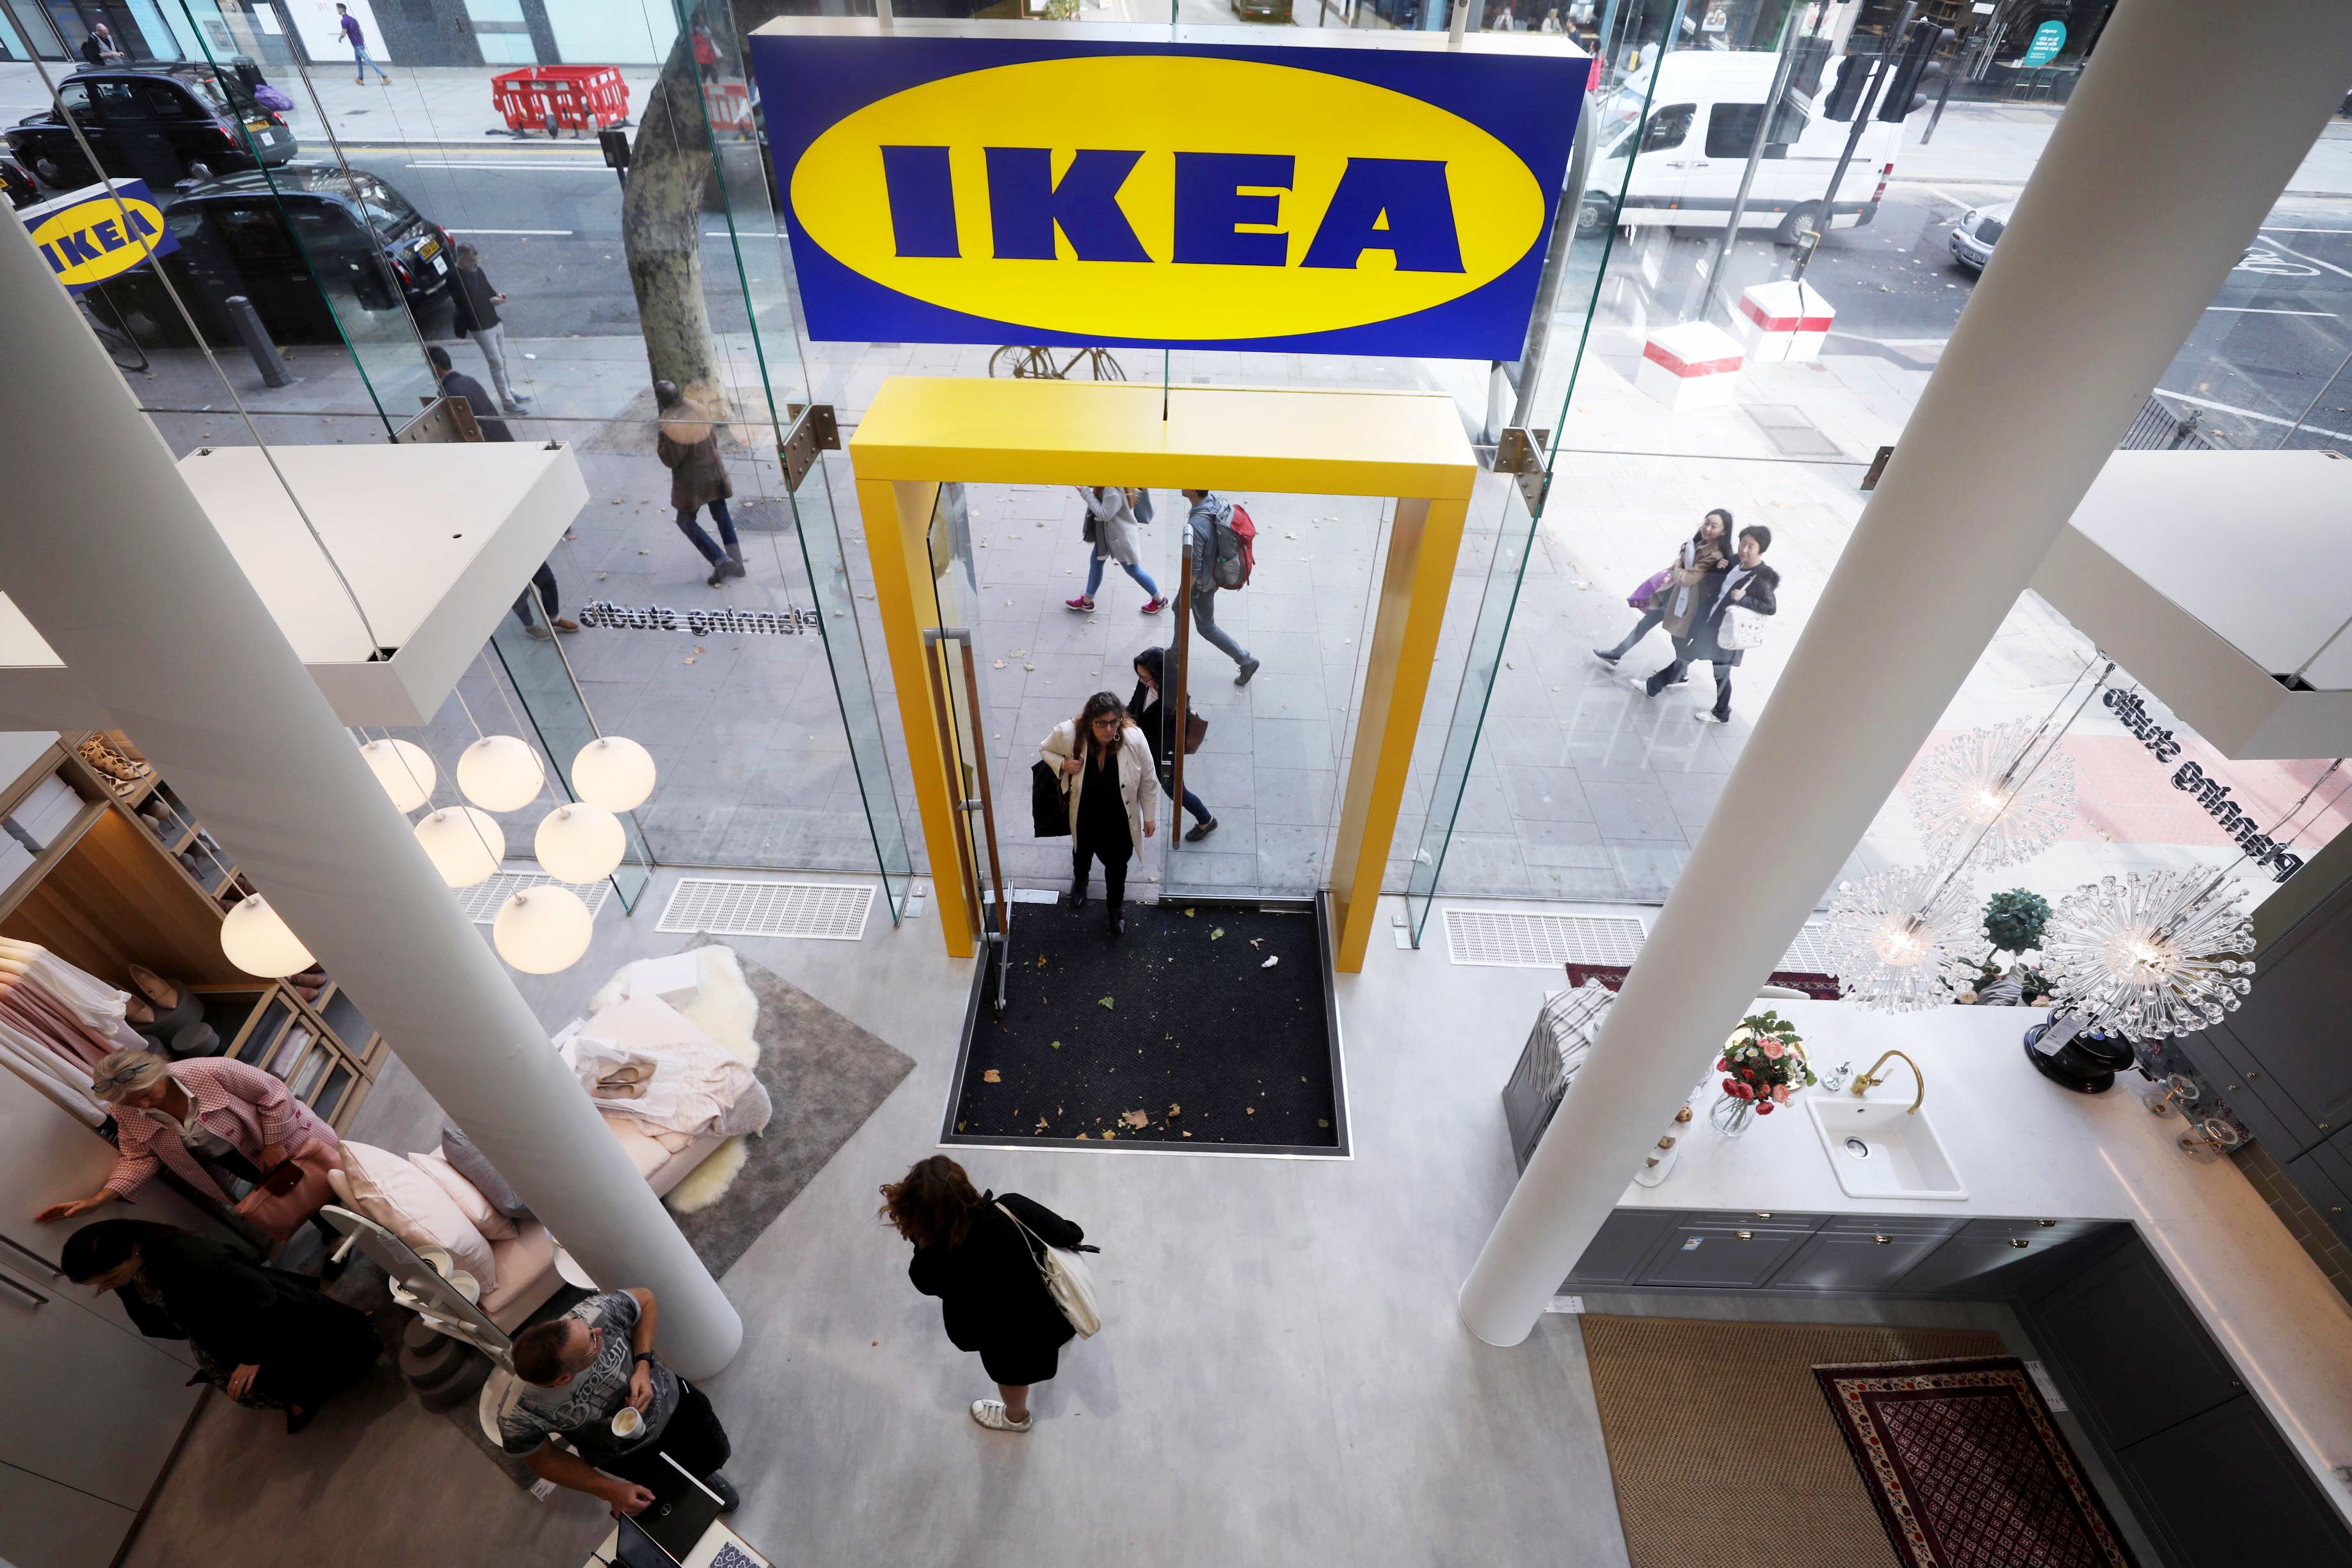 IKEA opening new stores in the US